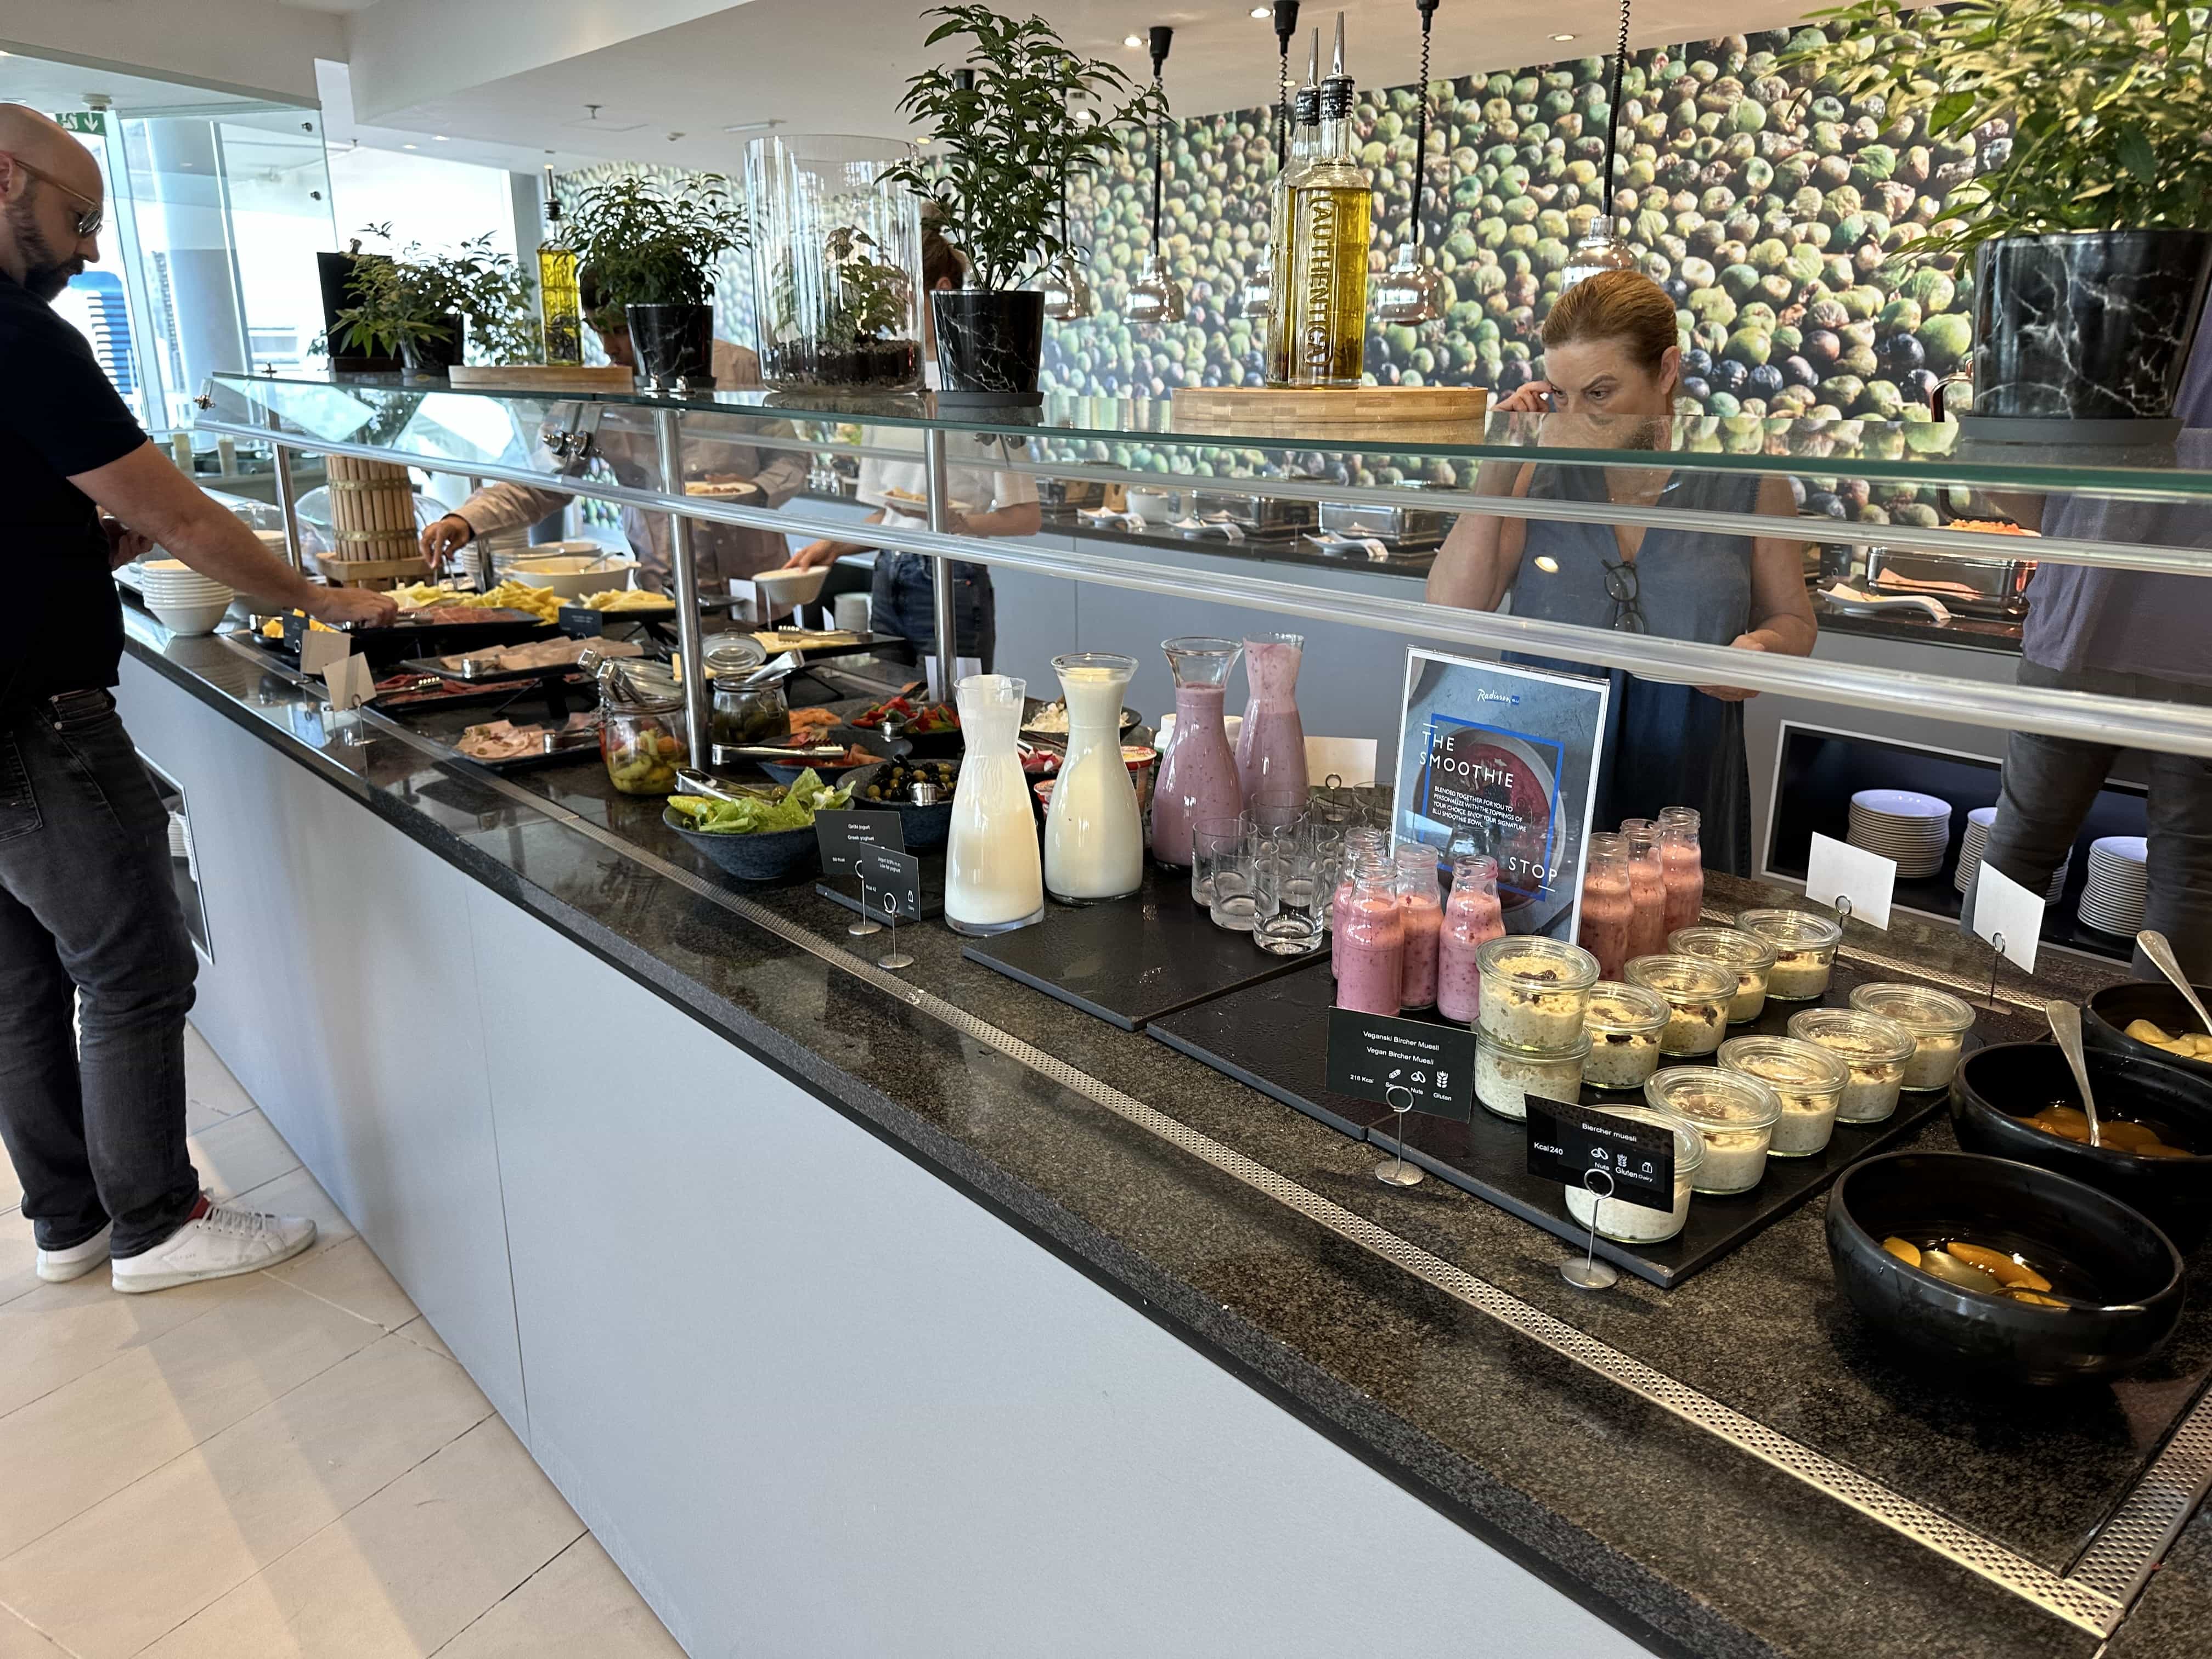 An assortment of continental foods at a buffet, including yogurts, smoothies, and fruit